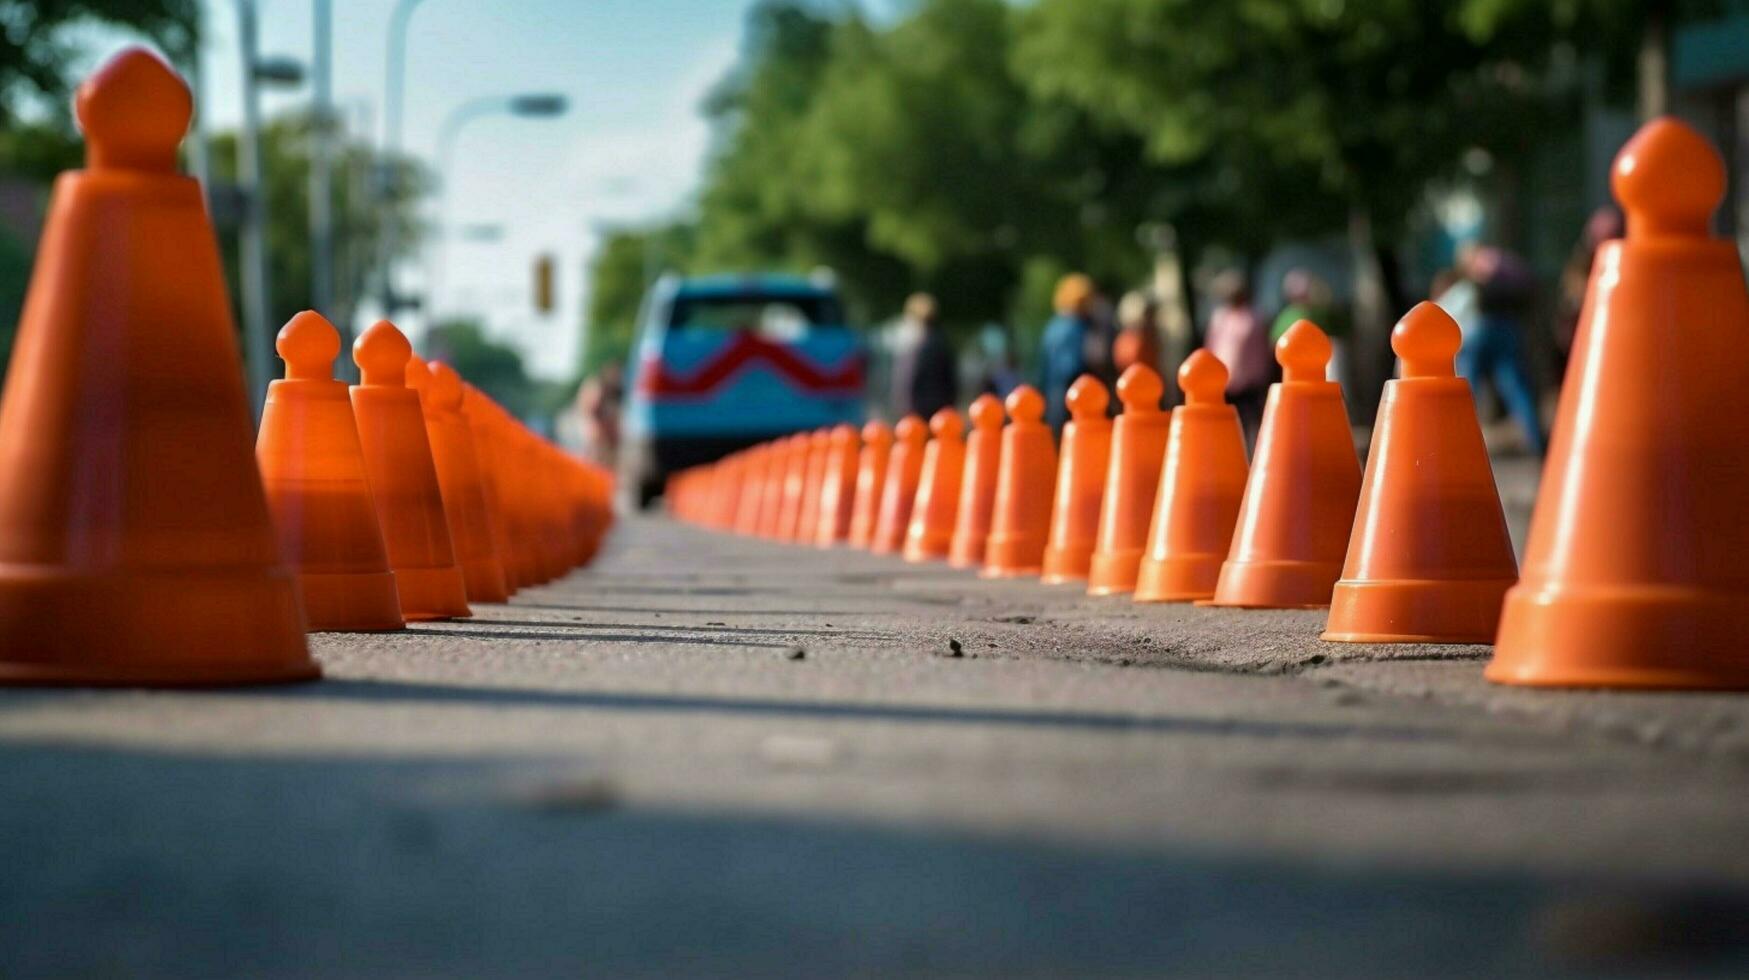 traffic cones in a row on a busy street with photo